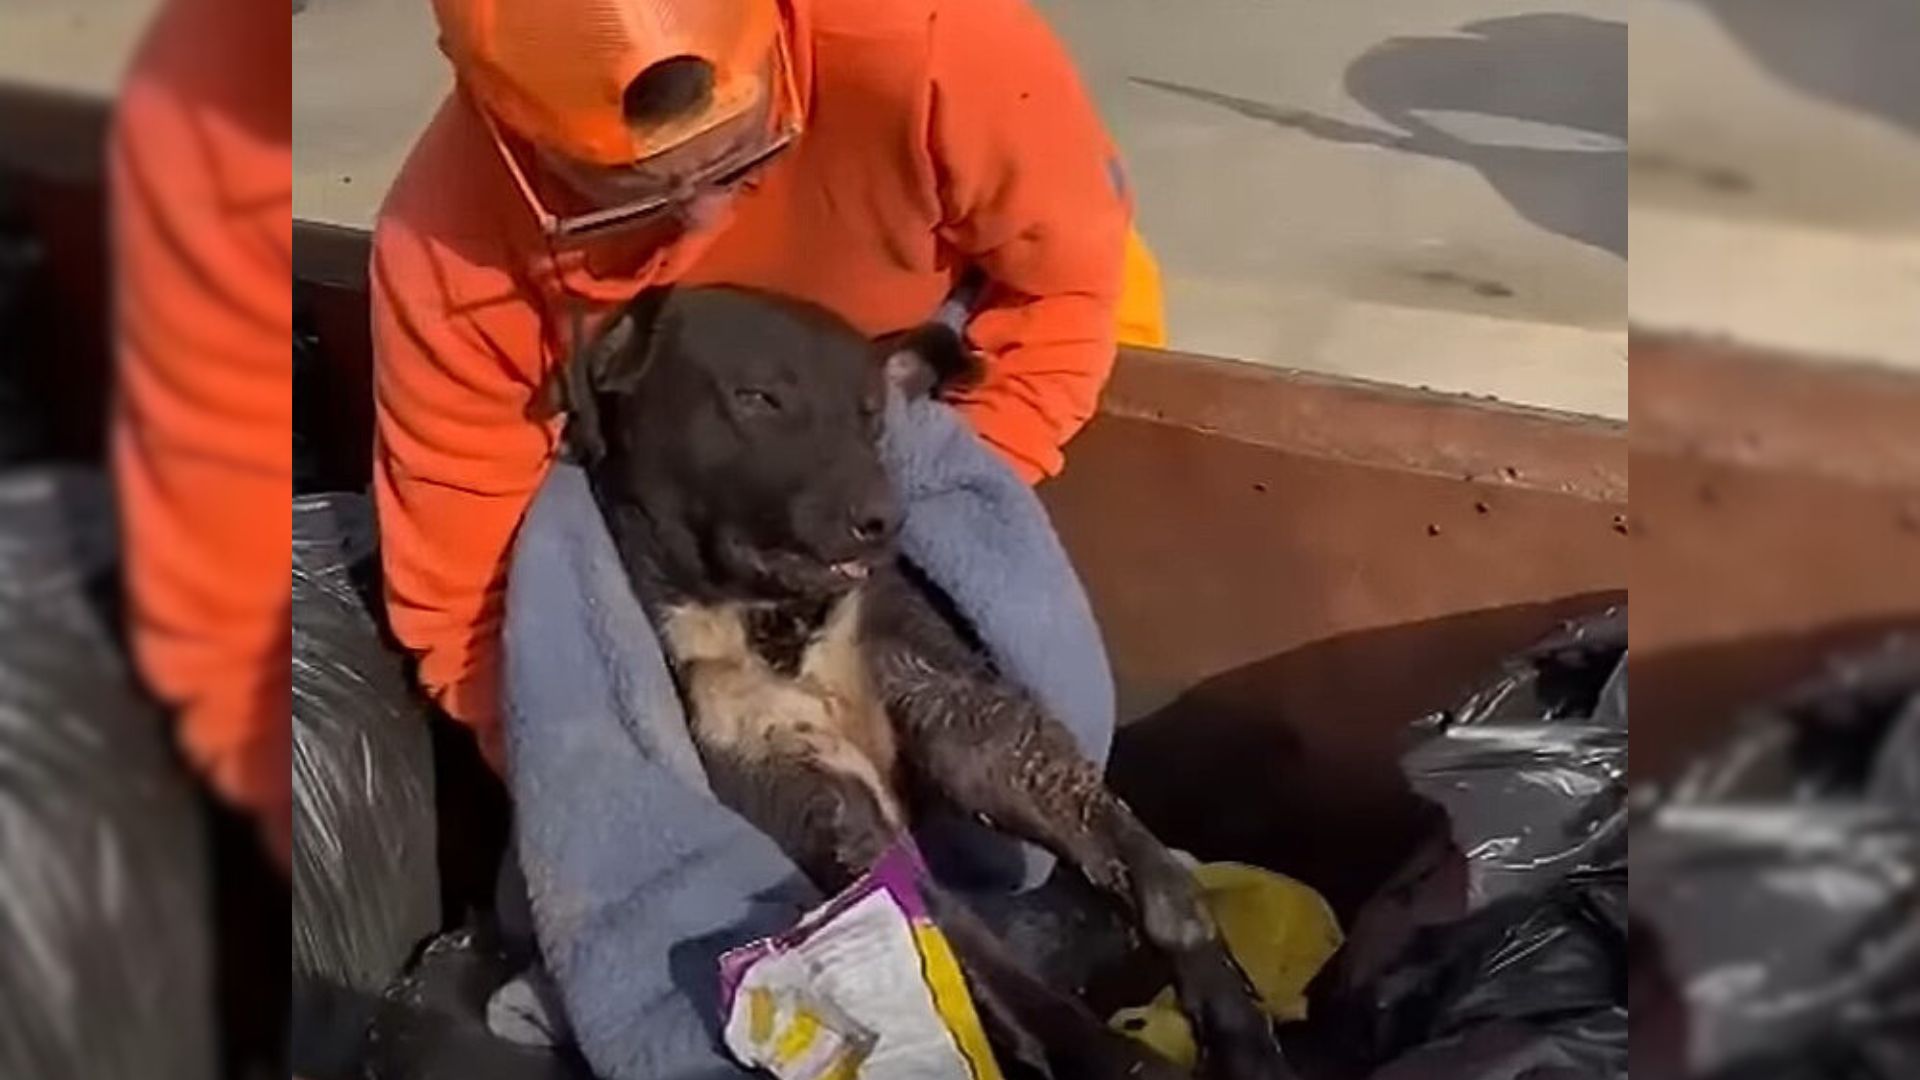 Police Officers Noticed An Injured Dog Dumped In A Dumpster And Rush To Help Him